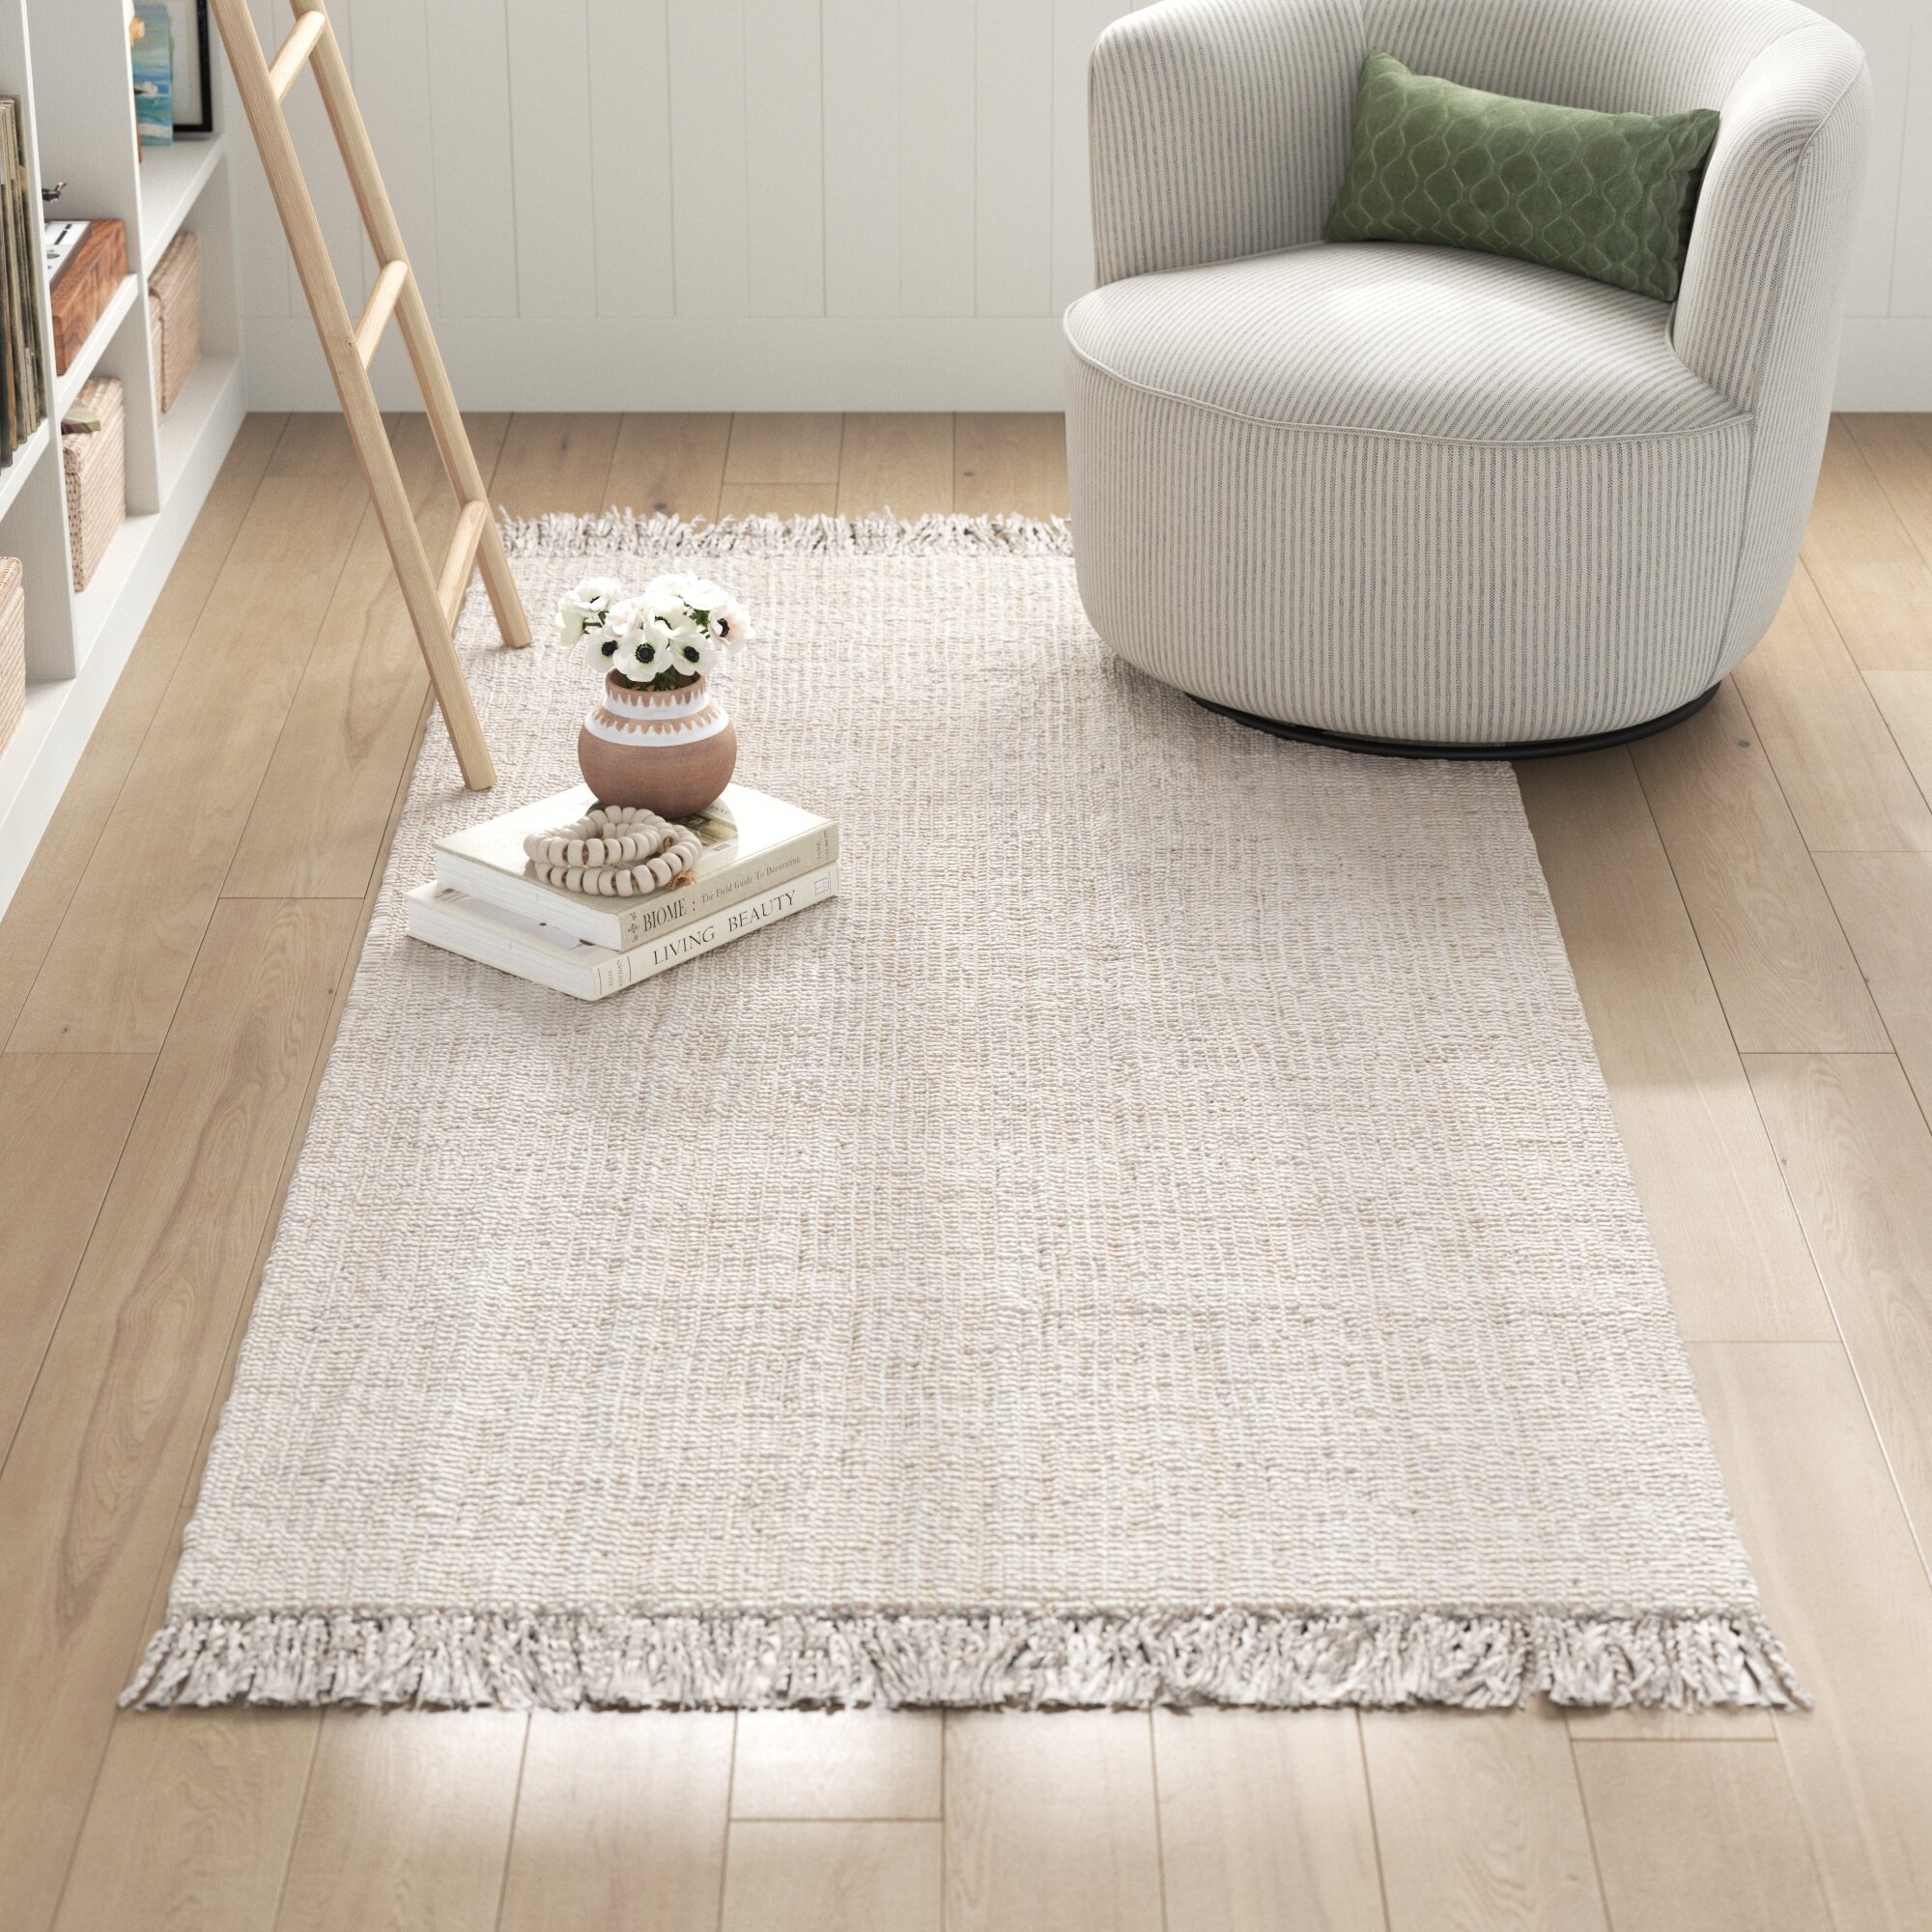 A Buyer's Guide to Designer Jute Rugs